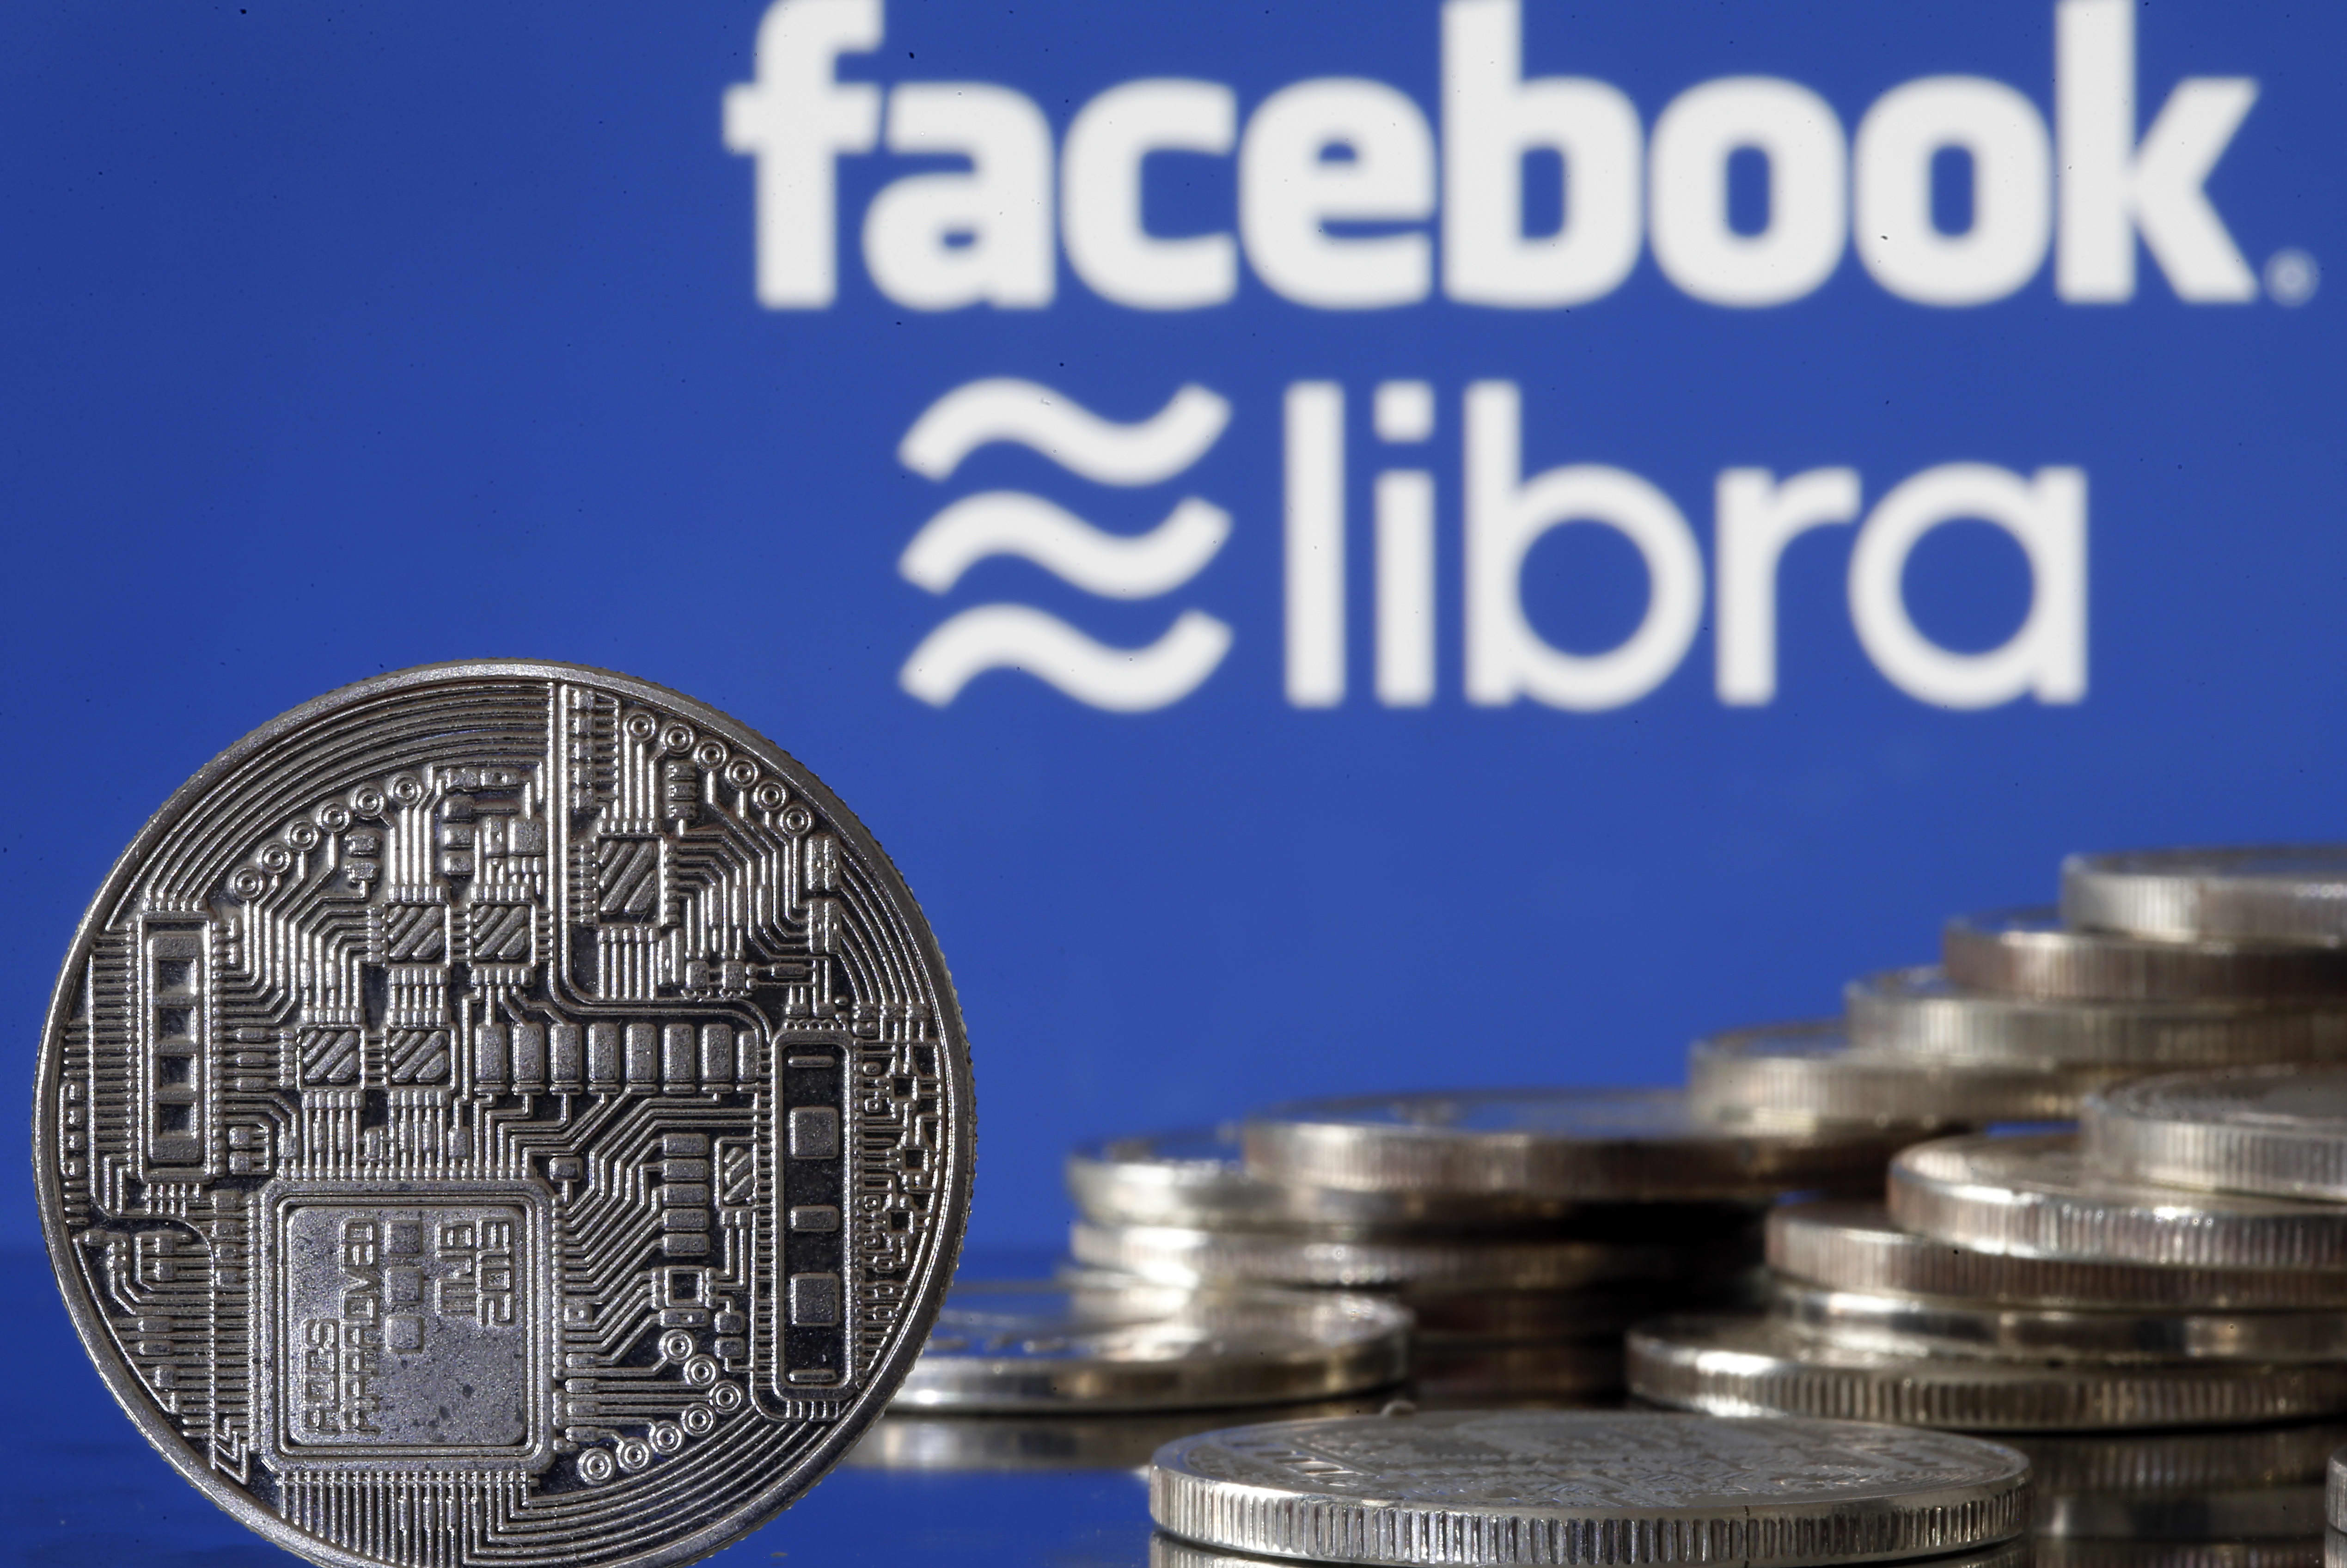 Facebook's Libra currency could debut in a limited form early next year